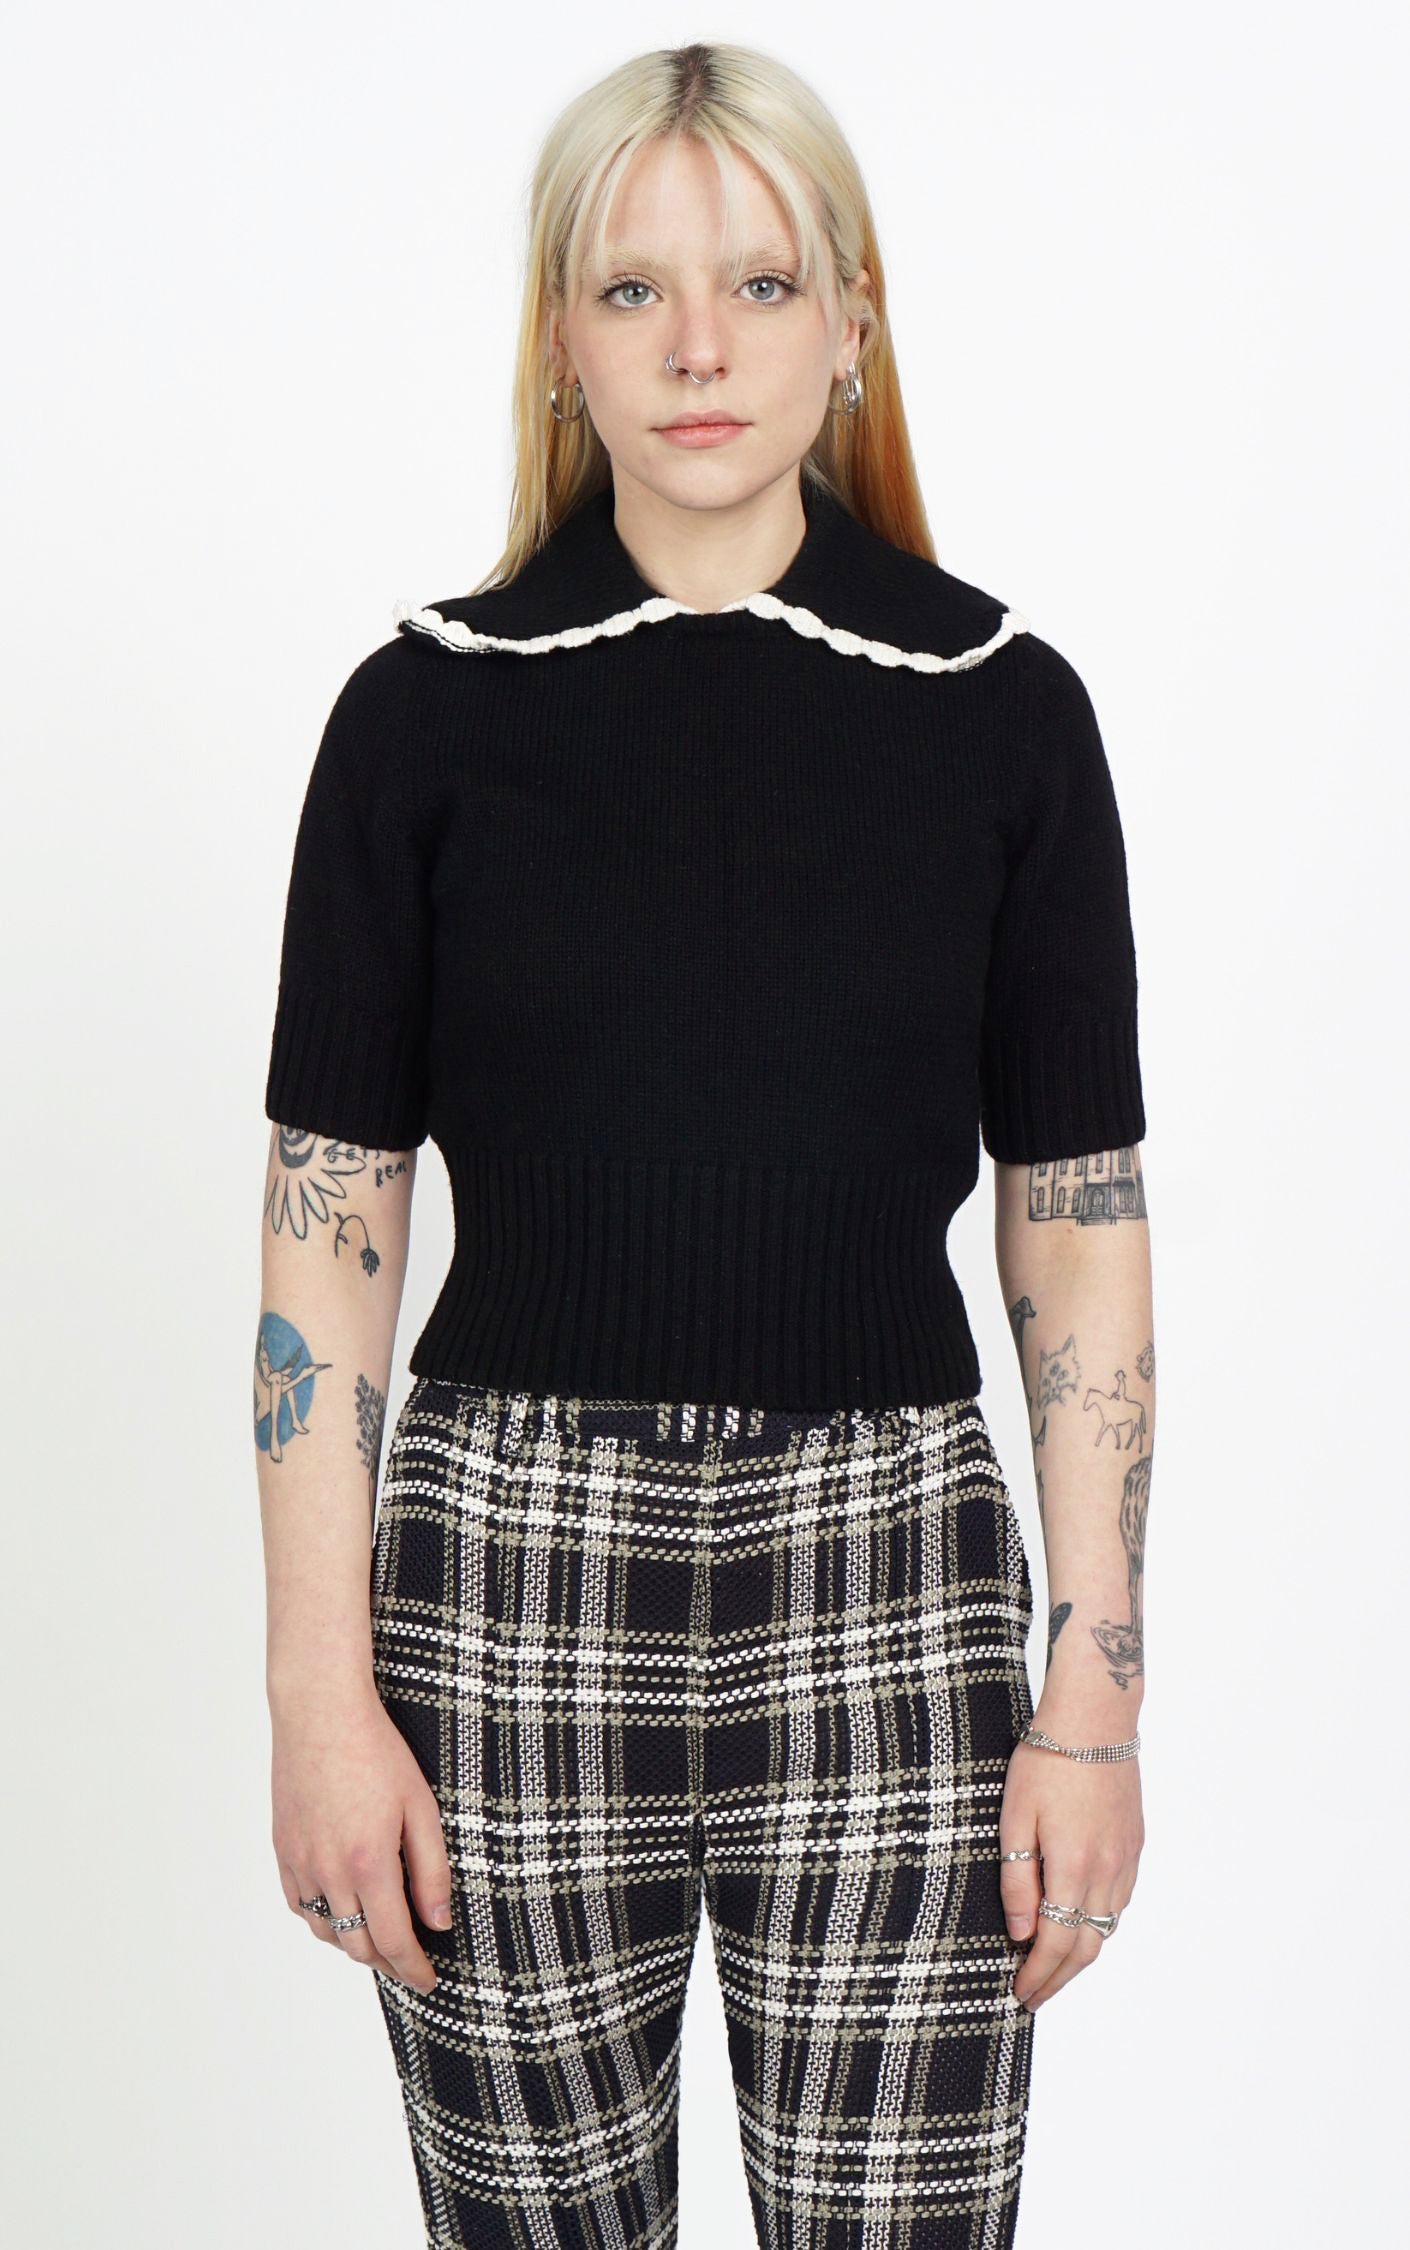 & OTHER STORIES Black Wide Collar Wool Sweater resellum